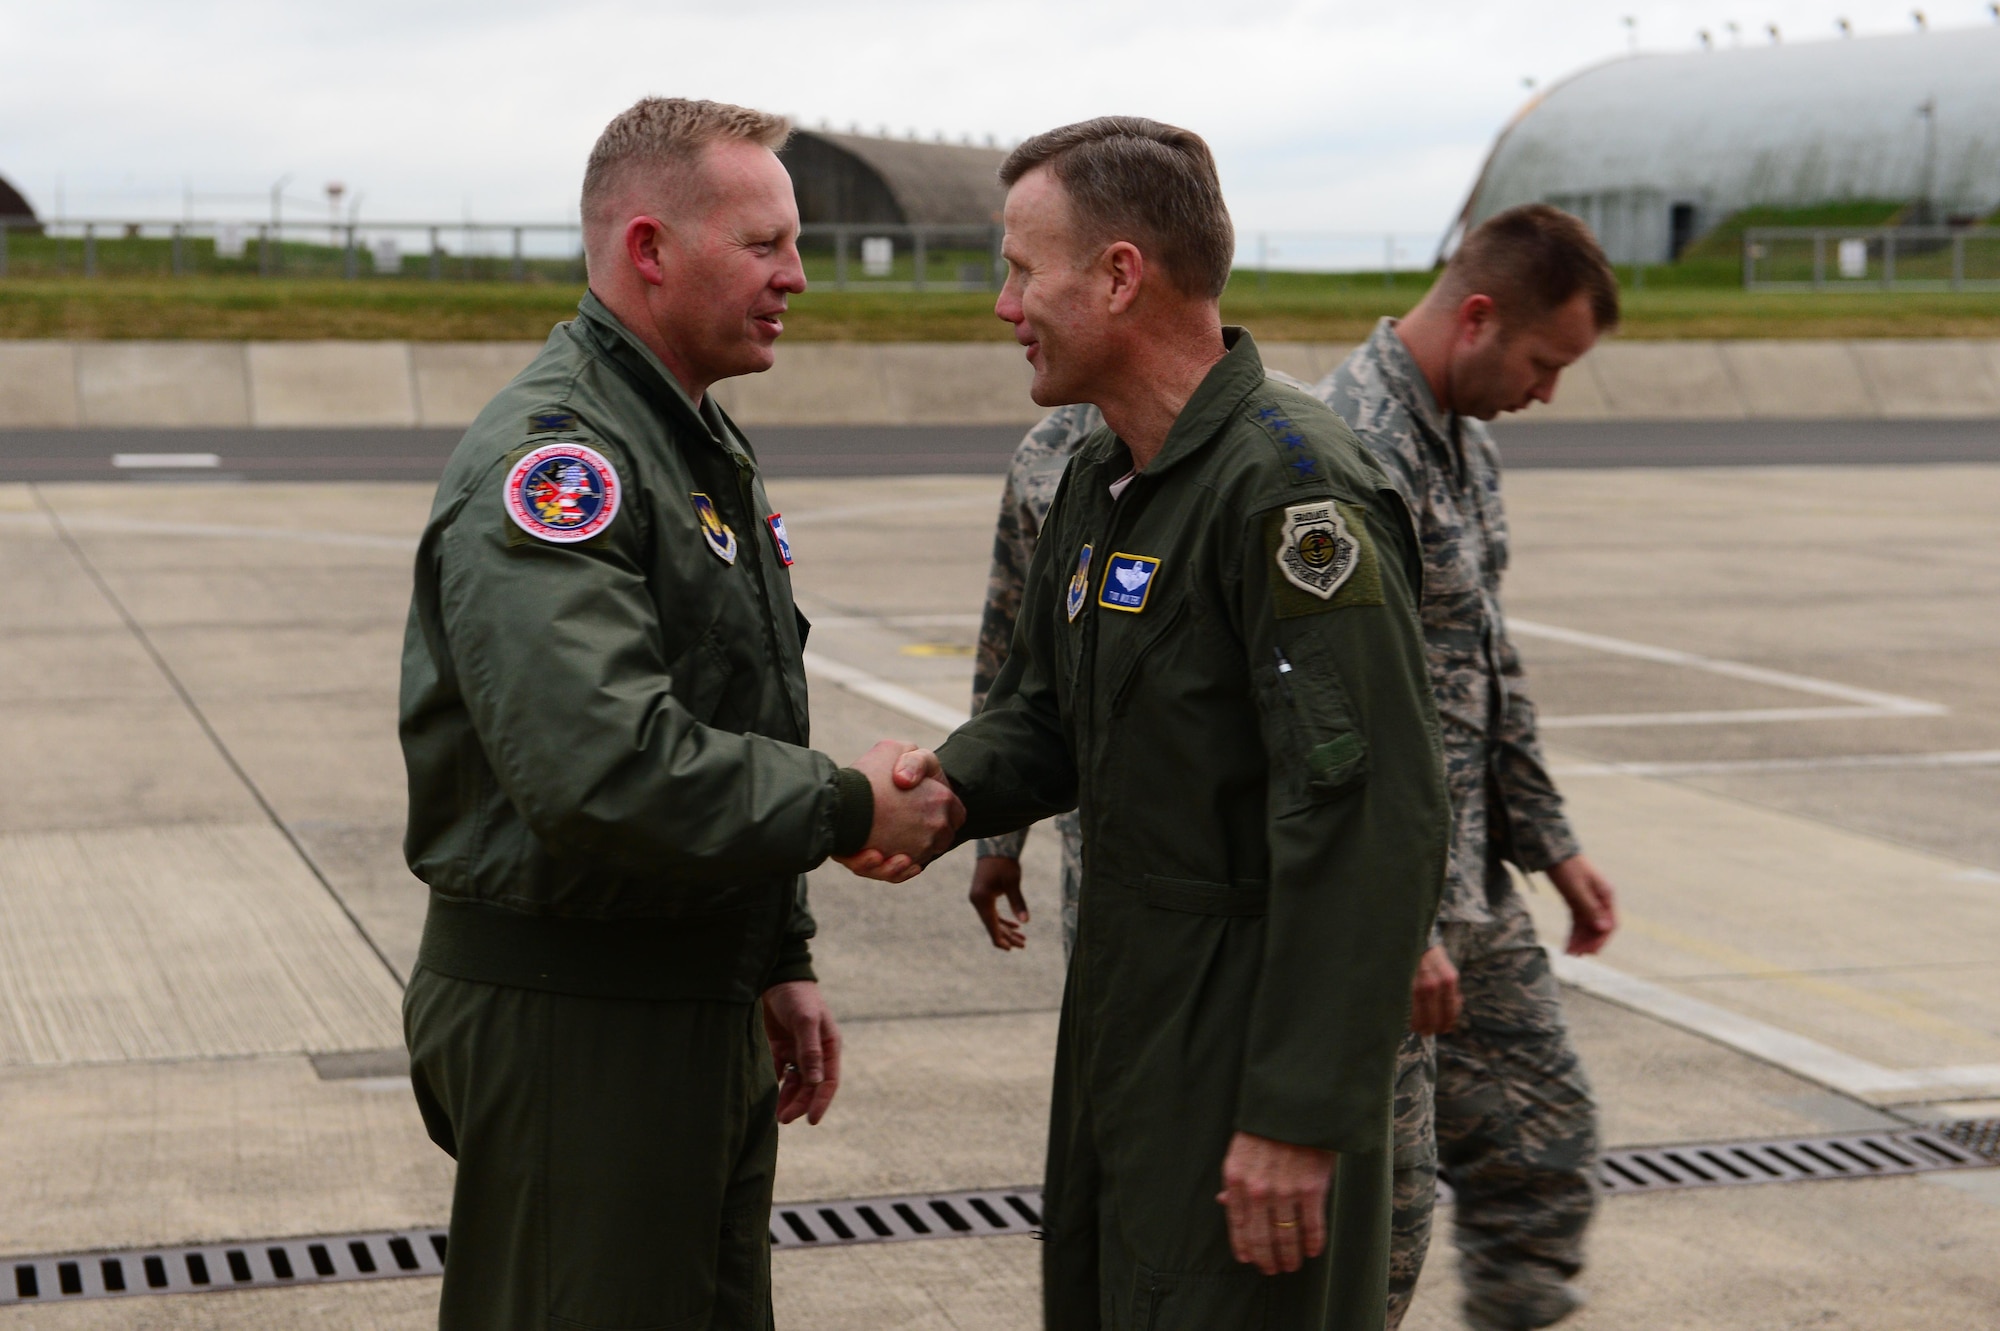 Gen. Tod D. Wolters, U.S. Air Forces in Europe and Air Forces Africa commander, right, shakes hands with Col. Joe McFall, 52nd Fighter Wing commander, left, before departing Spangdahlem Air Base, Germany, Oct. 6, 2016. Wolters made his first visit to Spangdahlem since assuming command in August 2016, speaking to Airmen on the importance their missions and highlighting his mission priorities. (U.S. Air Force photo by Senior Airman Joshua R. M. Dewberry)